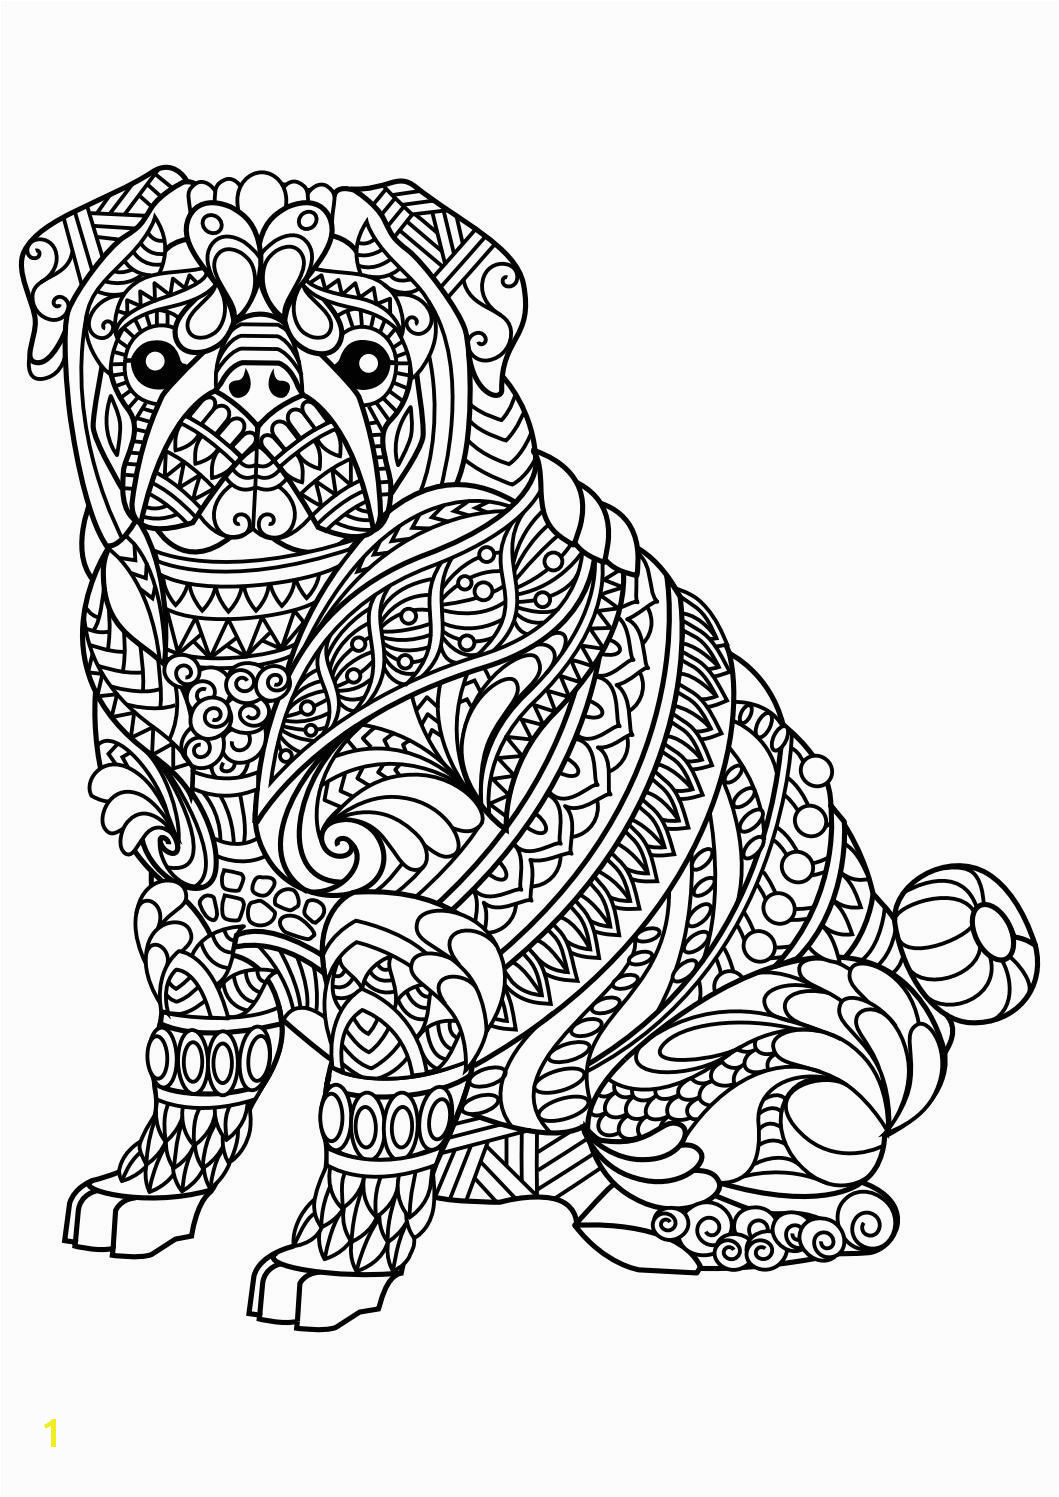 Animal coloring pages pdf Animal Coloring Pages is a free adult coloring book with 20 different animal pictures to color horse coloring pages dog cat